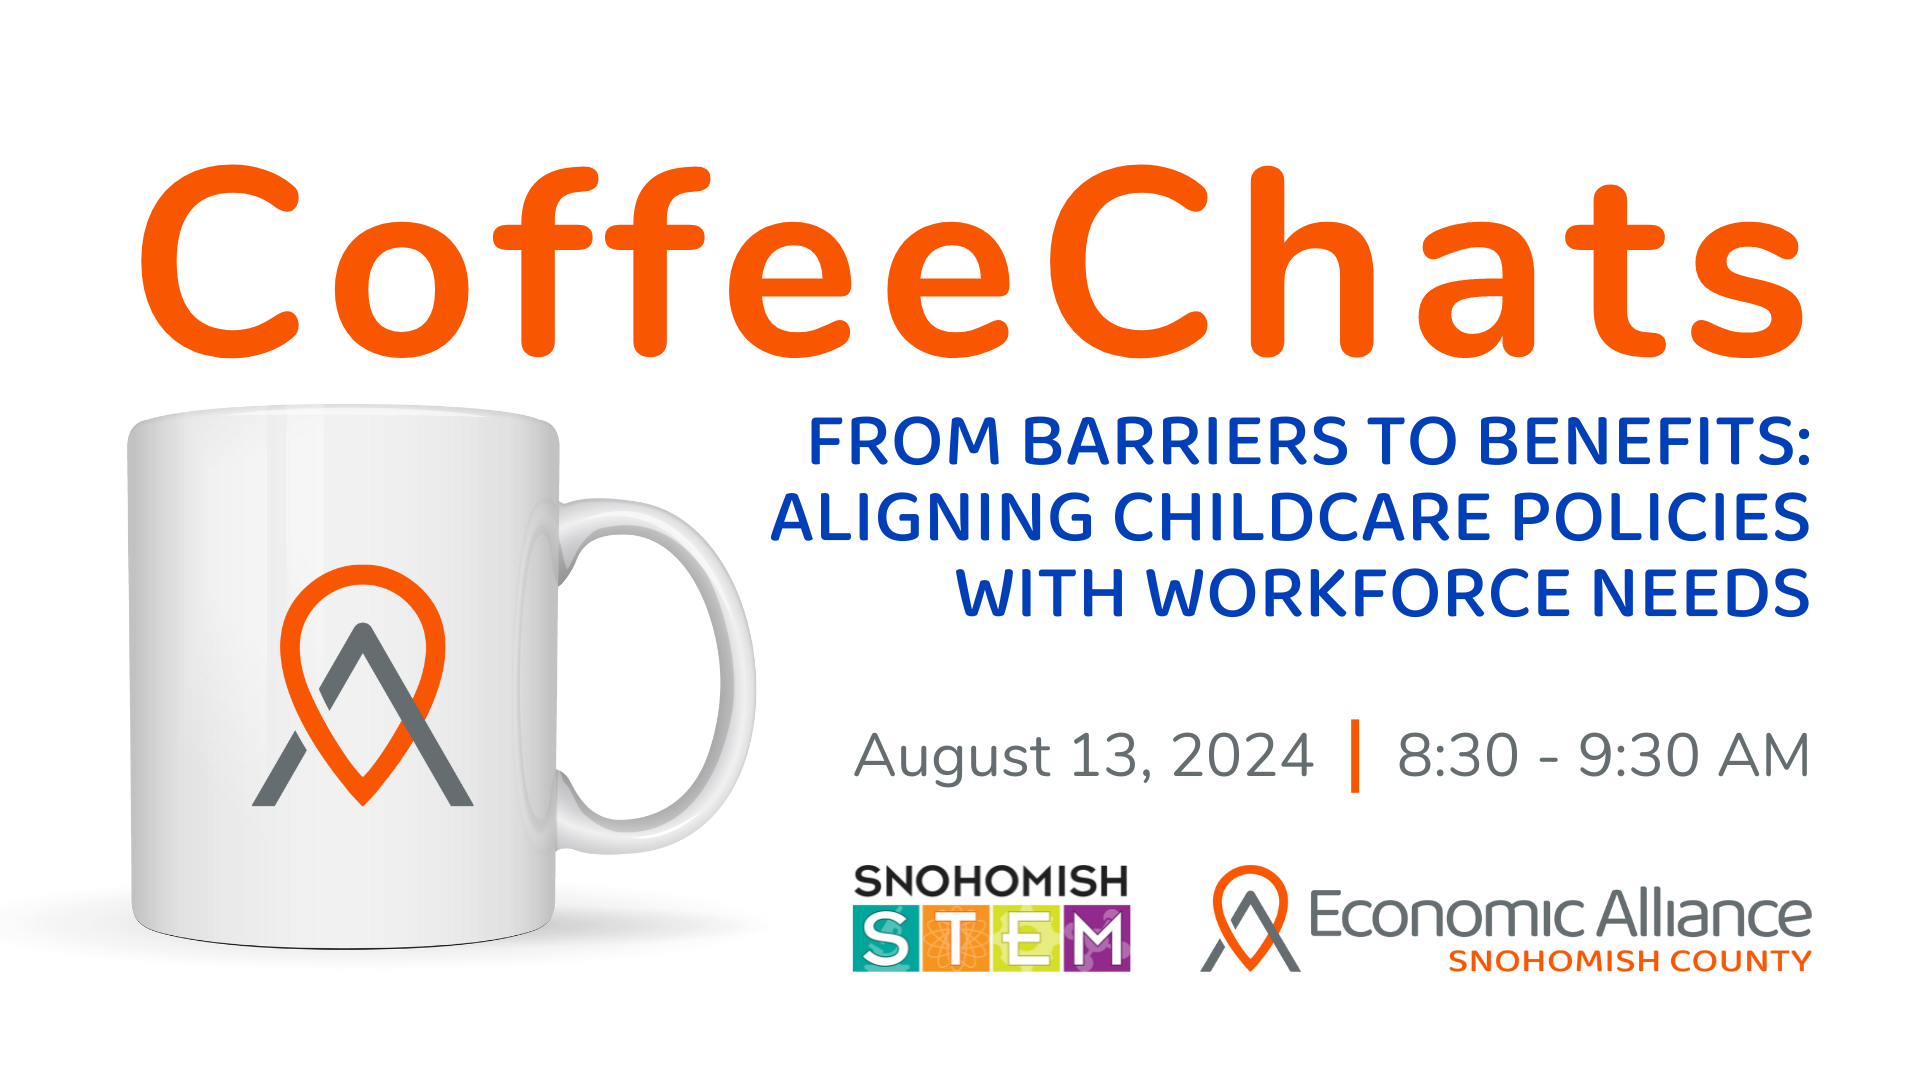 Coffee Chats - From Barriers to Benefits: Aligning Childcare Policies with Workforce Needs Photo